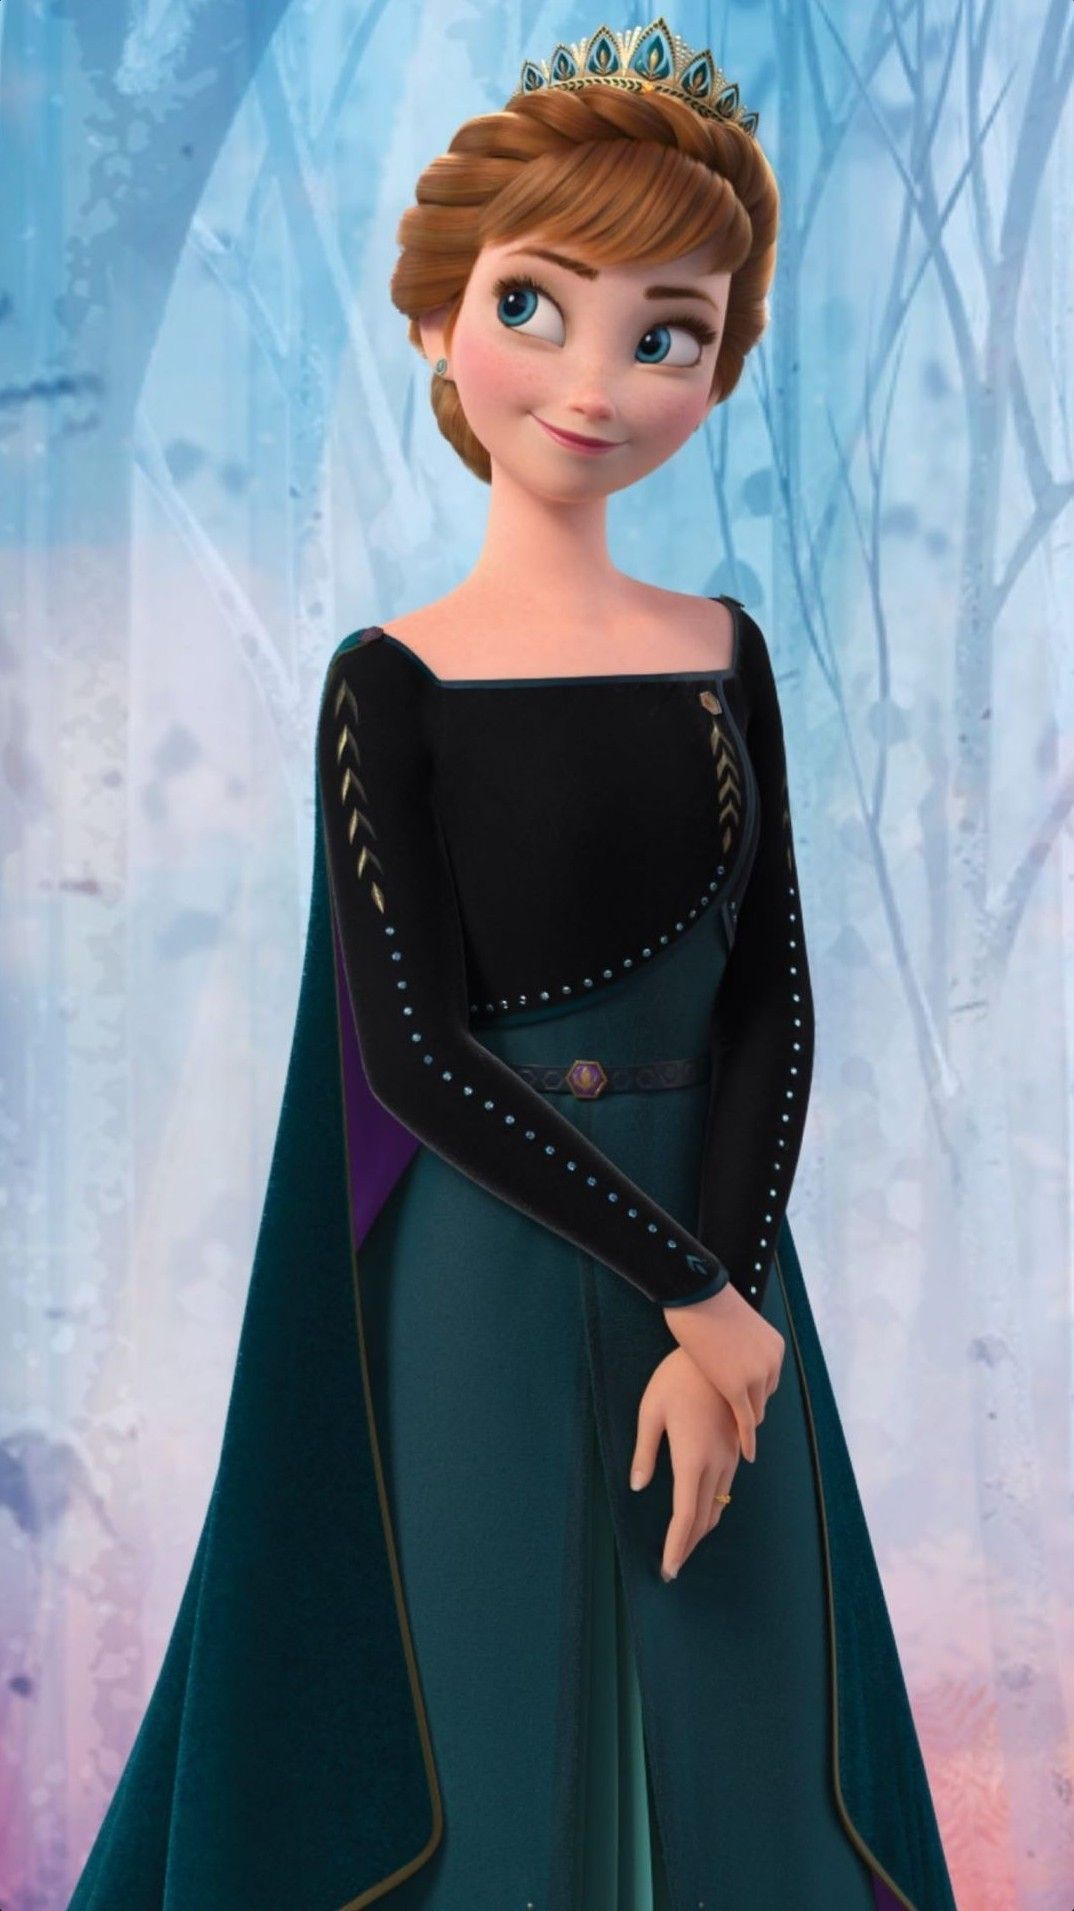 Disney and other animated movies. Disney princess frozen, Frozen disney movie, Disney frozen elsa